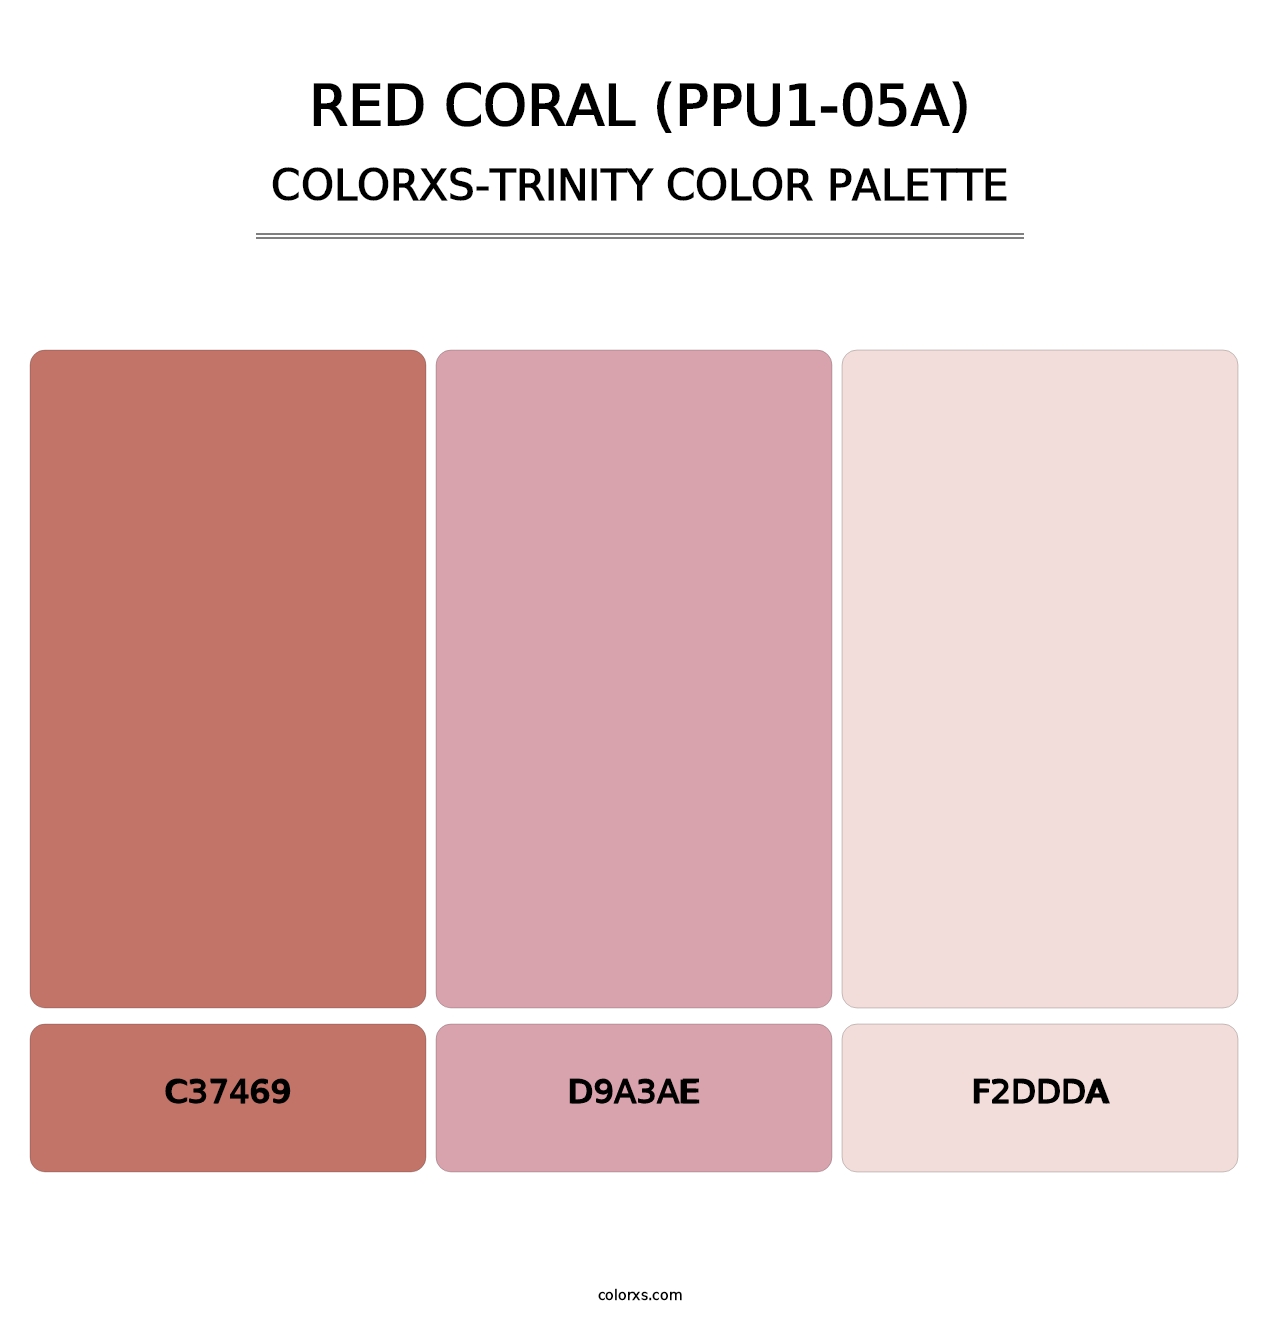 Red Coral (PPU1-05A) - Colorxs Trinity Palette